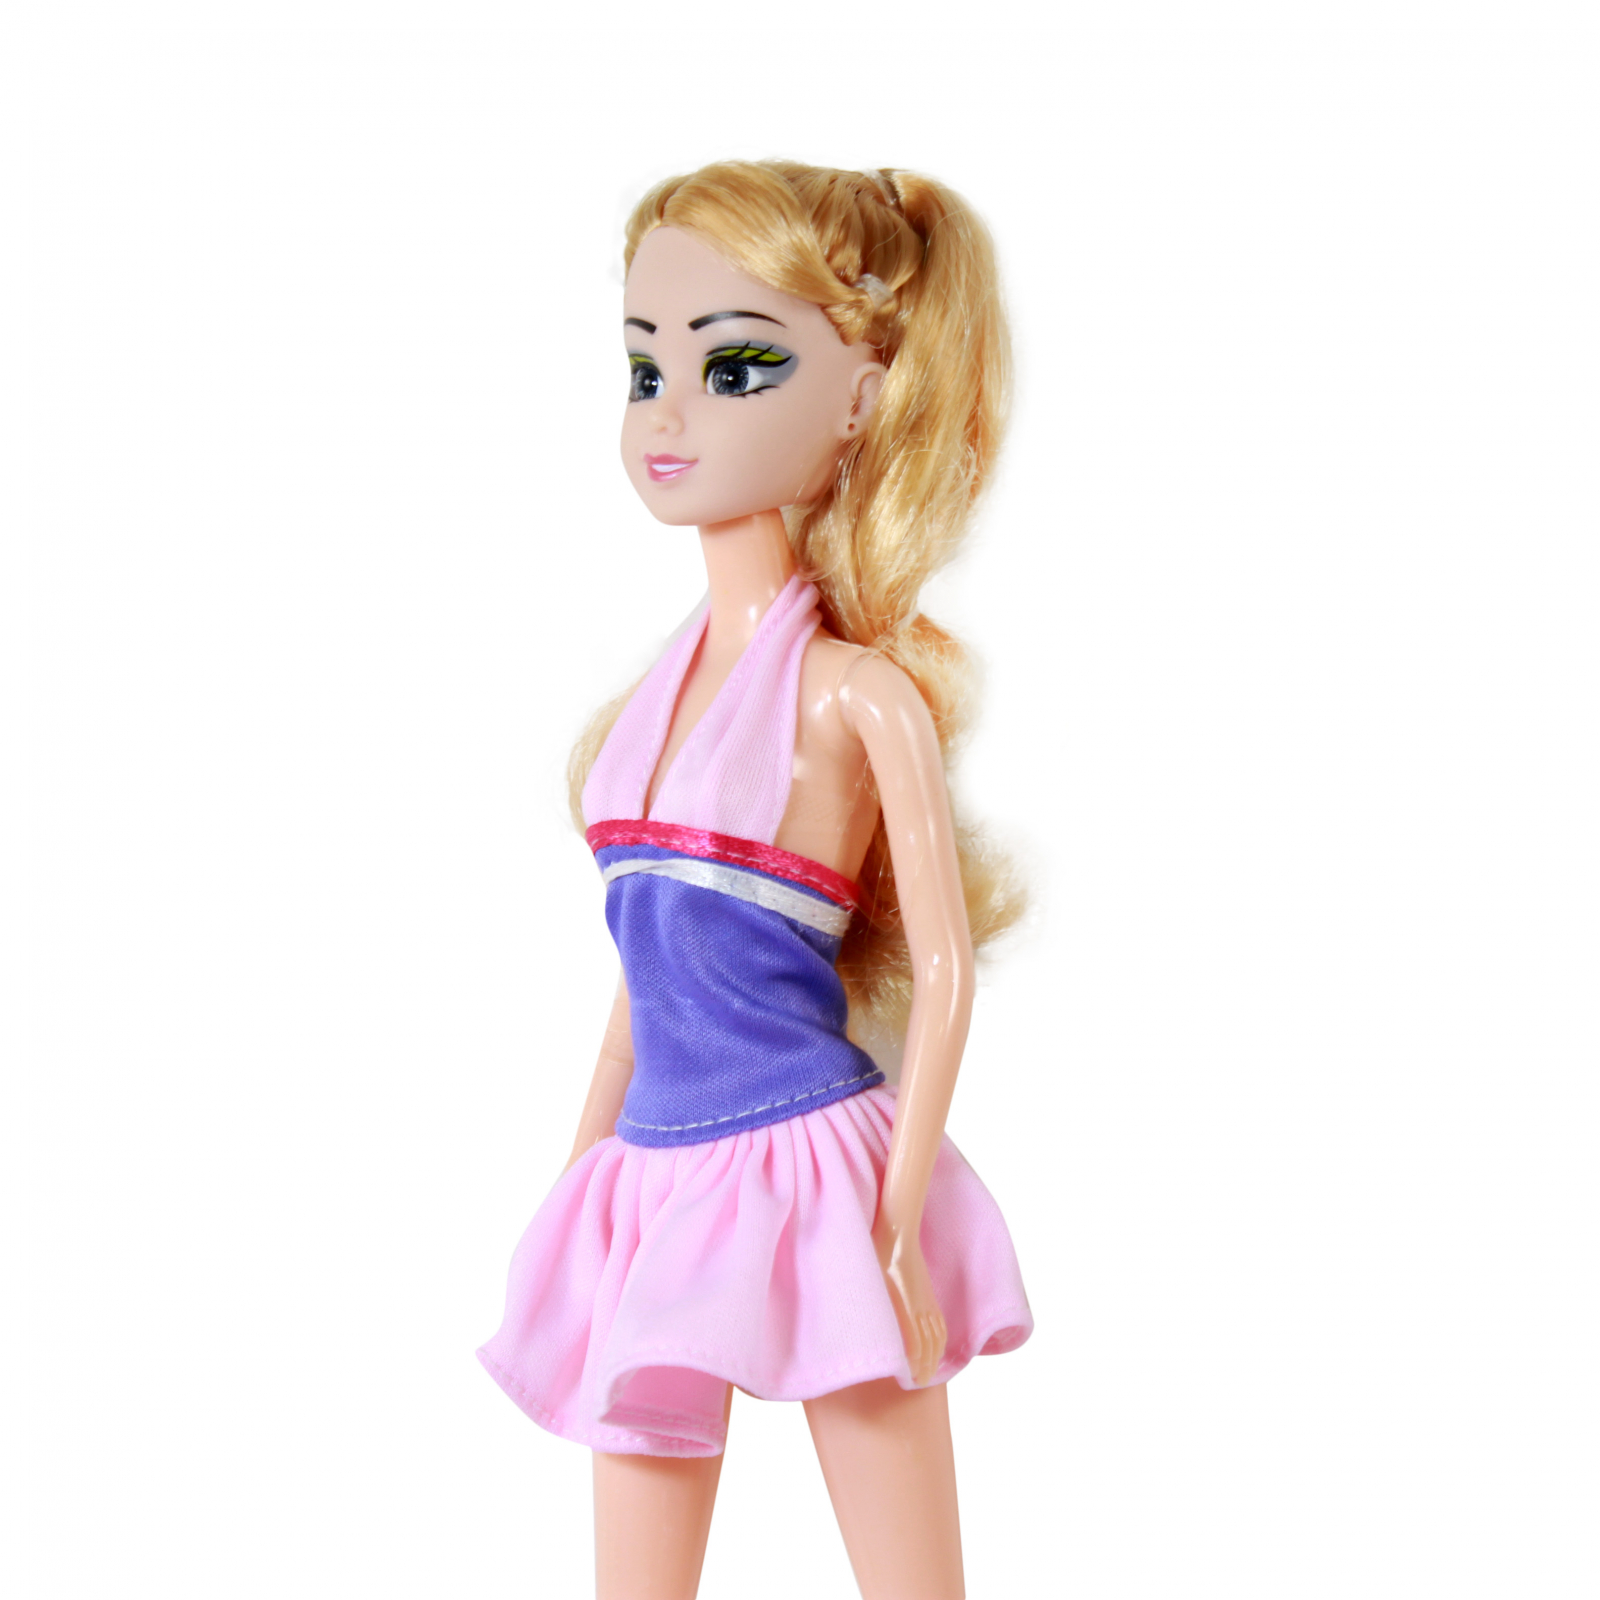 TychoTyke Blonde Fashion Doll Playset With Blue Pink Bike And Sports Equipment Tennis Rackets - Blue